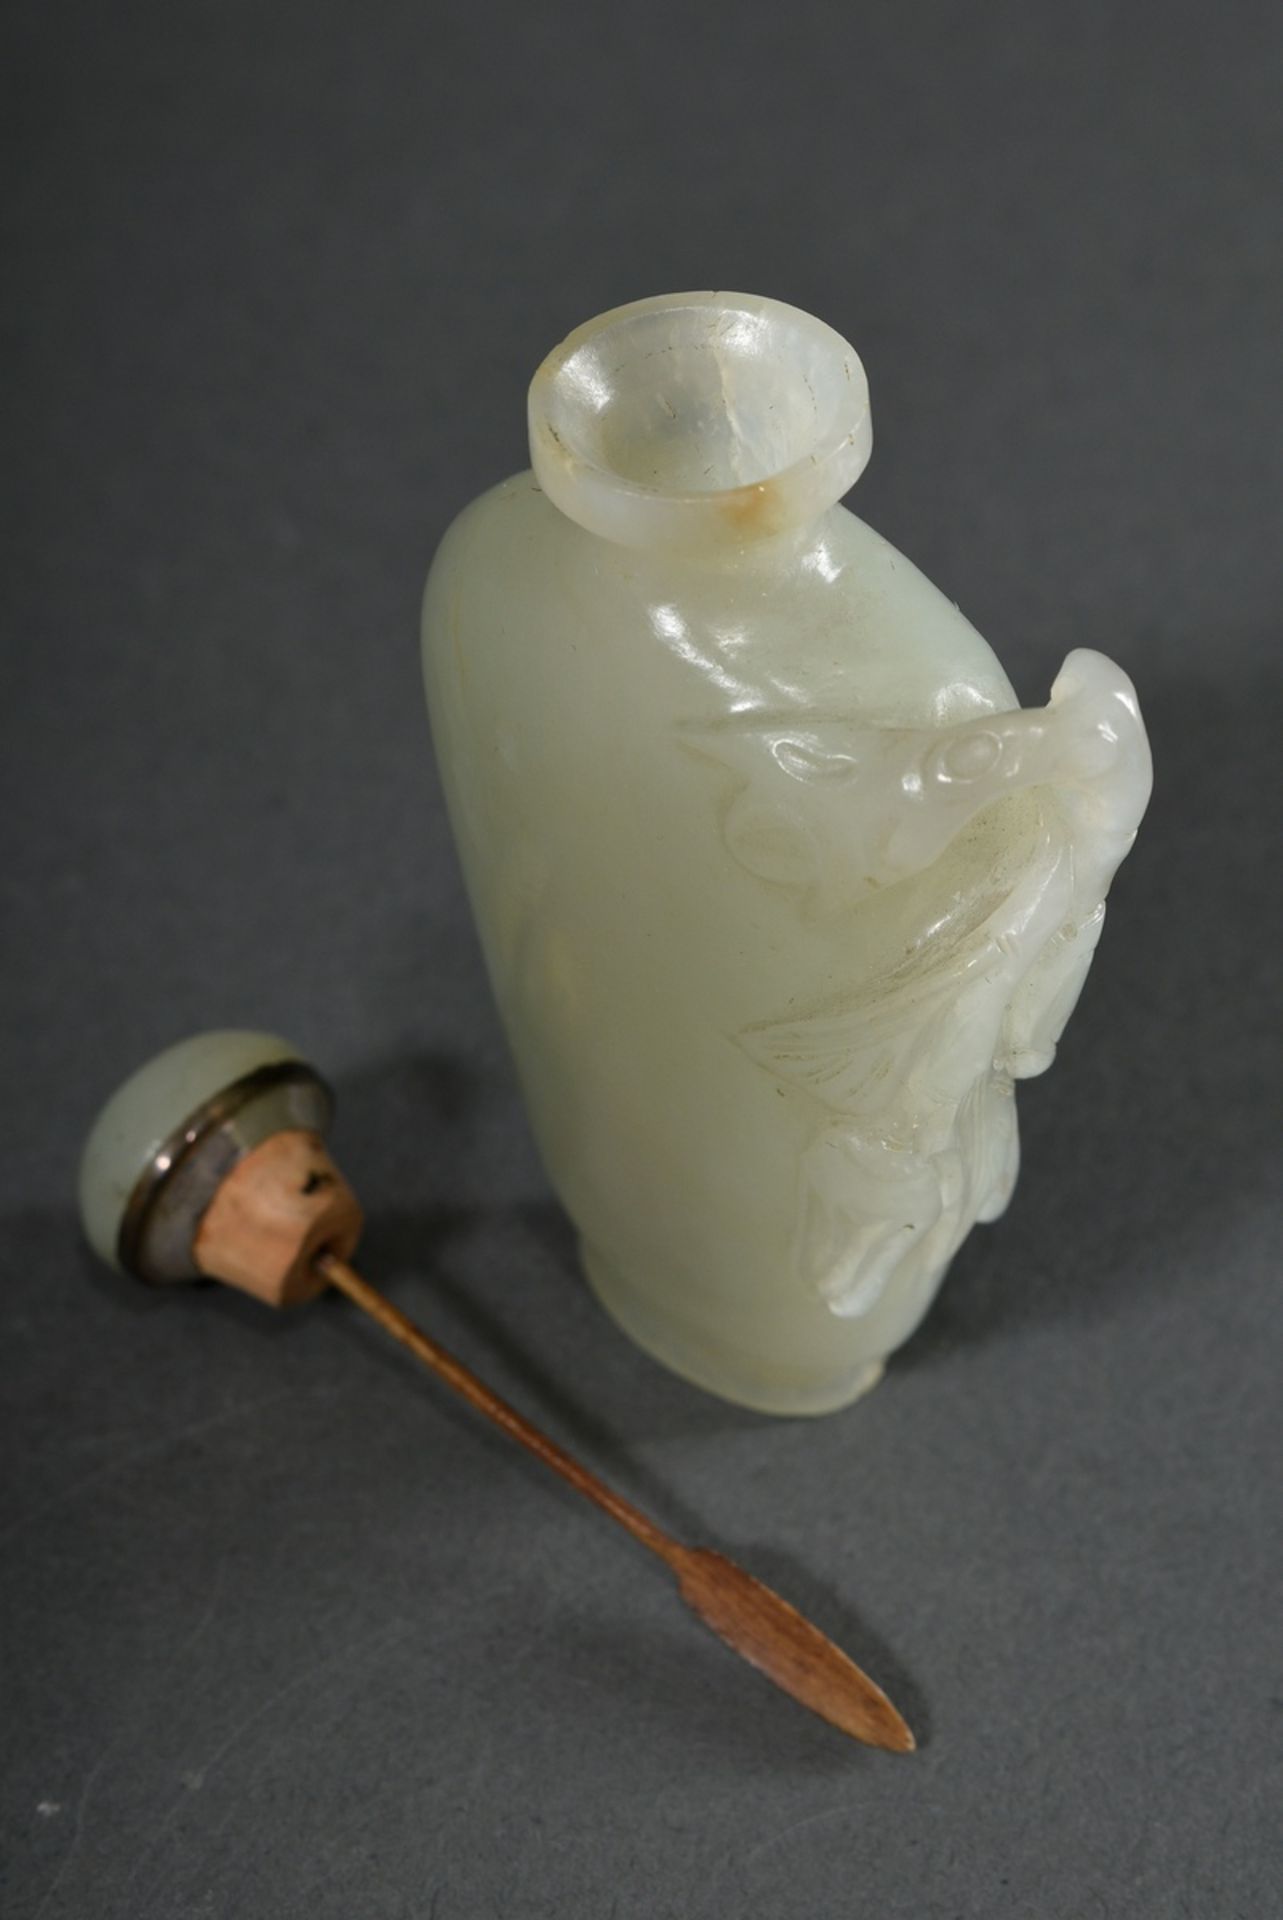 Seladon jade snuffbottle with "flower and leaf decoration" in high relief, China probably Qing dyna - Image 5 of 5